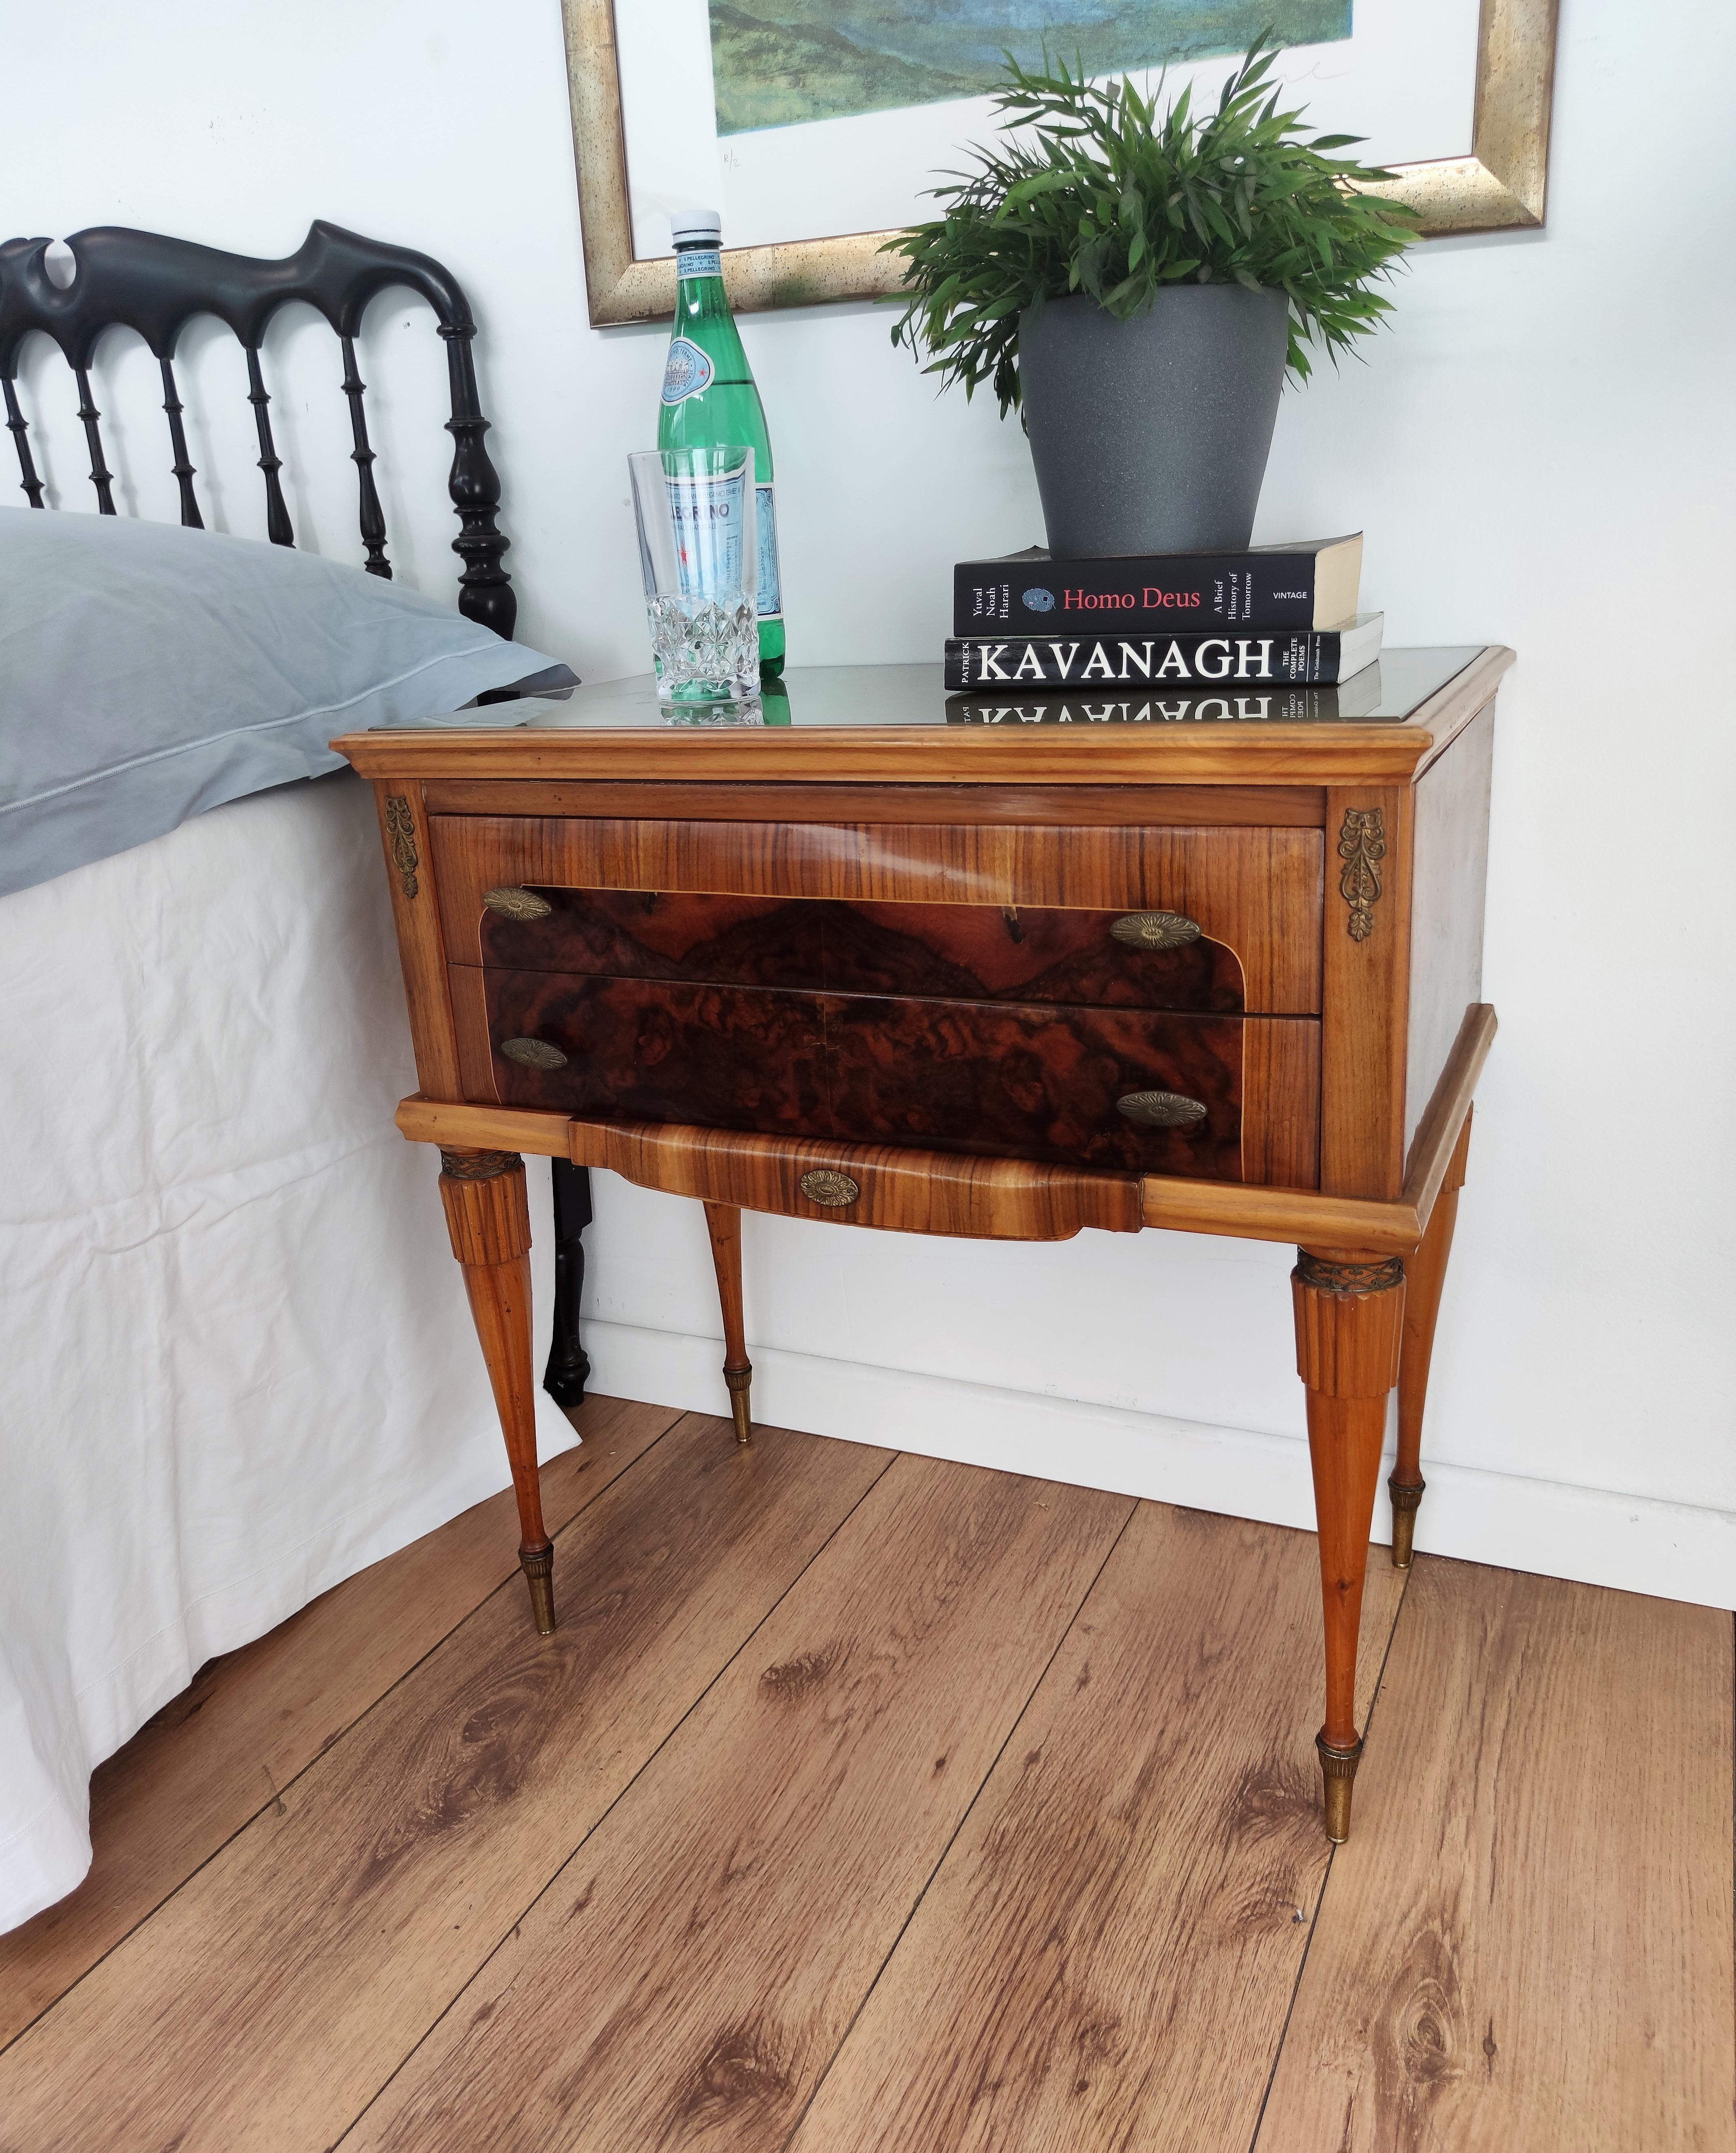 Very elegant and refined Italian 1950s neoclassical pair of bedside tables with inlay walnut veneer wood, 2 drawers with brass handles, carved legs with brass final and lacquered glass top. Those nightstands make a great look in any style bedroom,